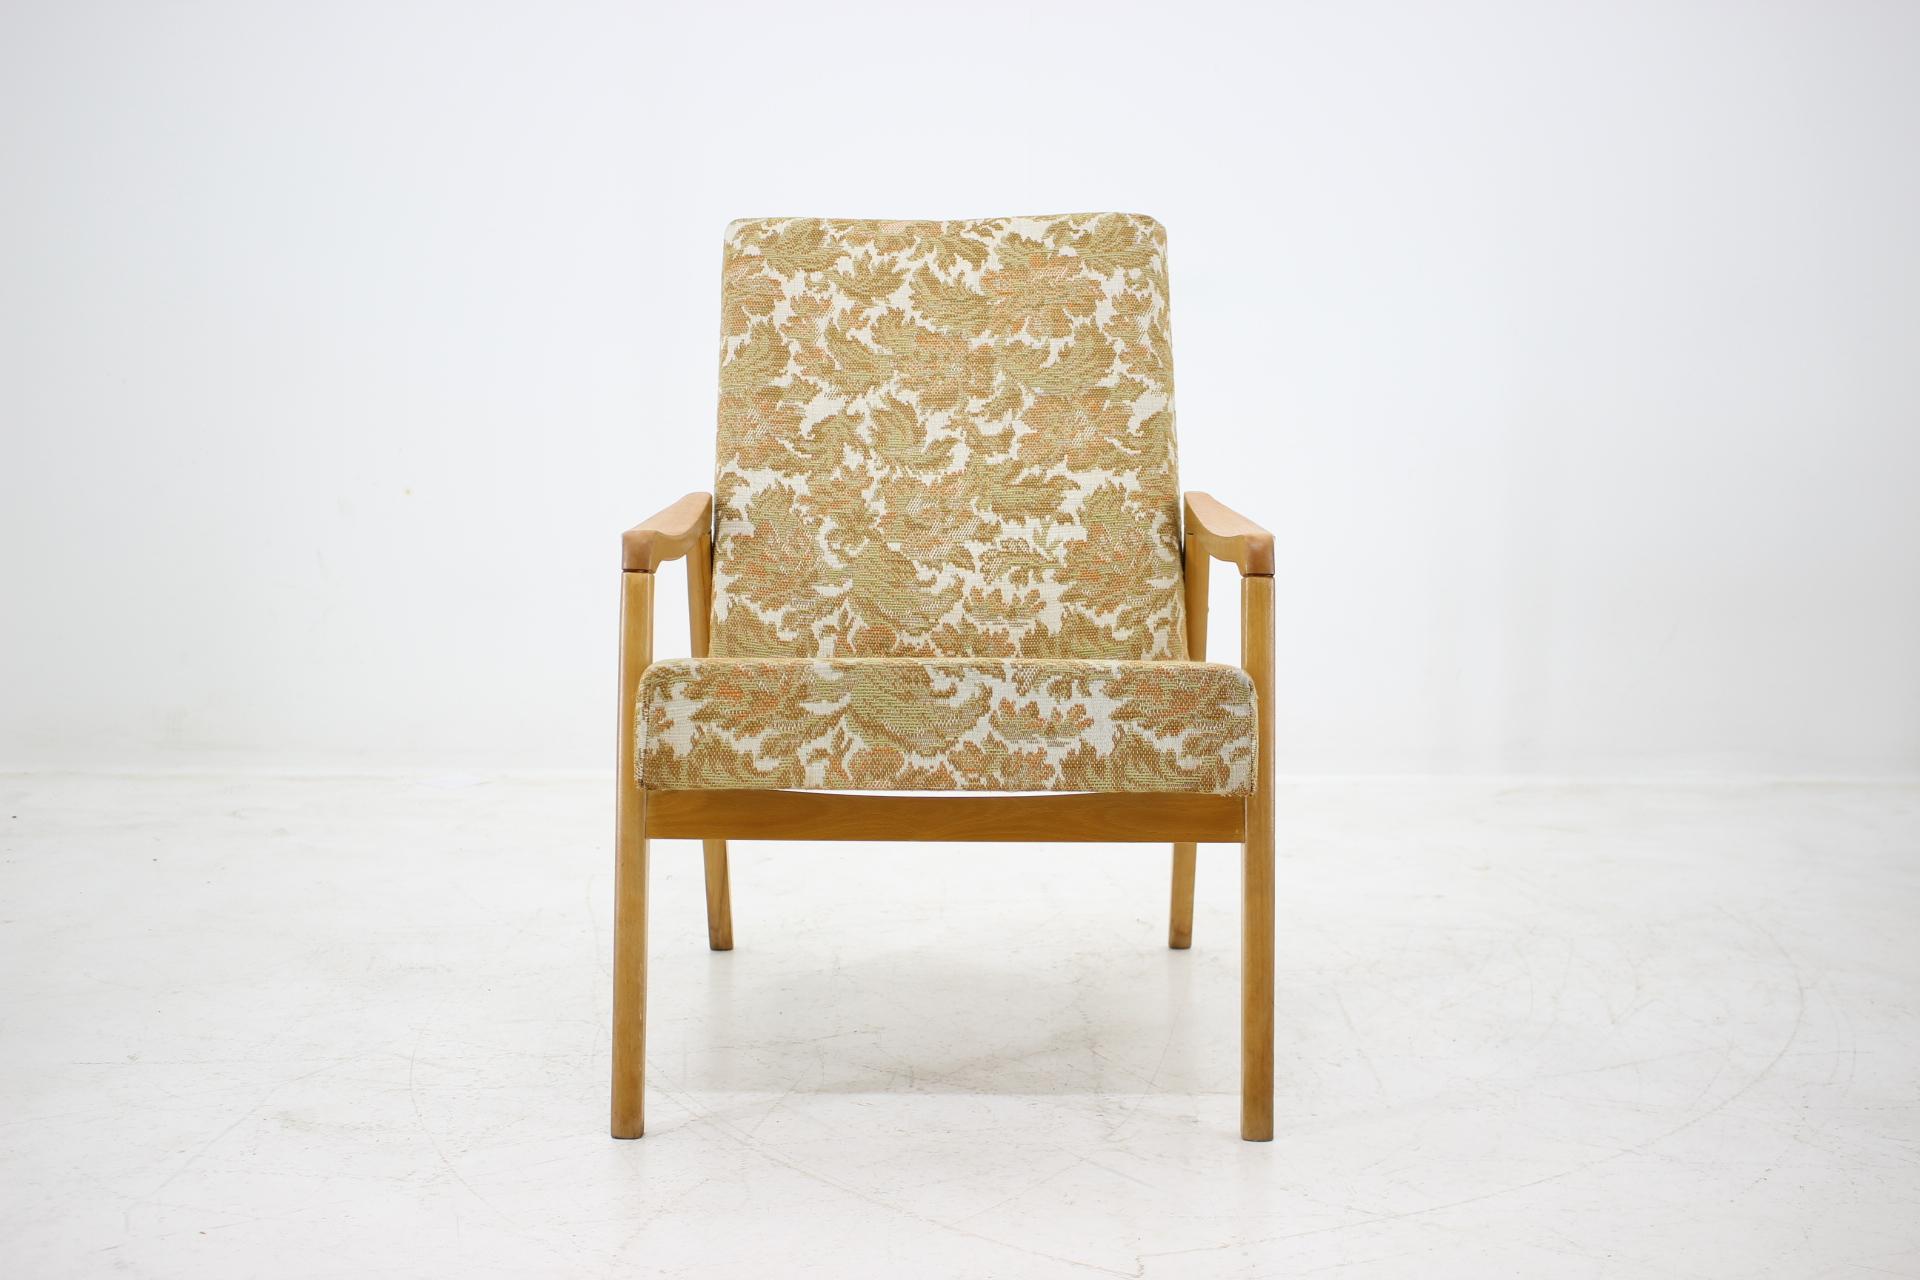 - Made in Czechoslovakia
- Made of wood, fabric
- Upholstery has some signs of use
- Original condition.